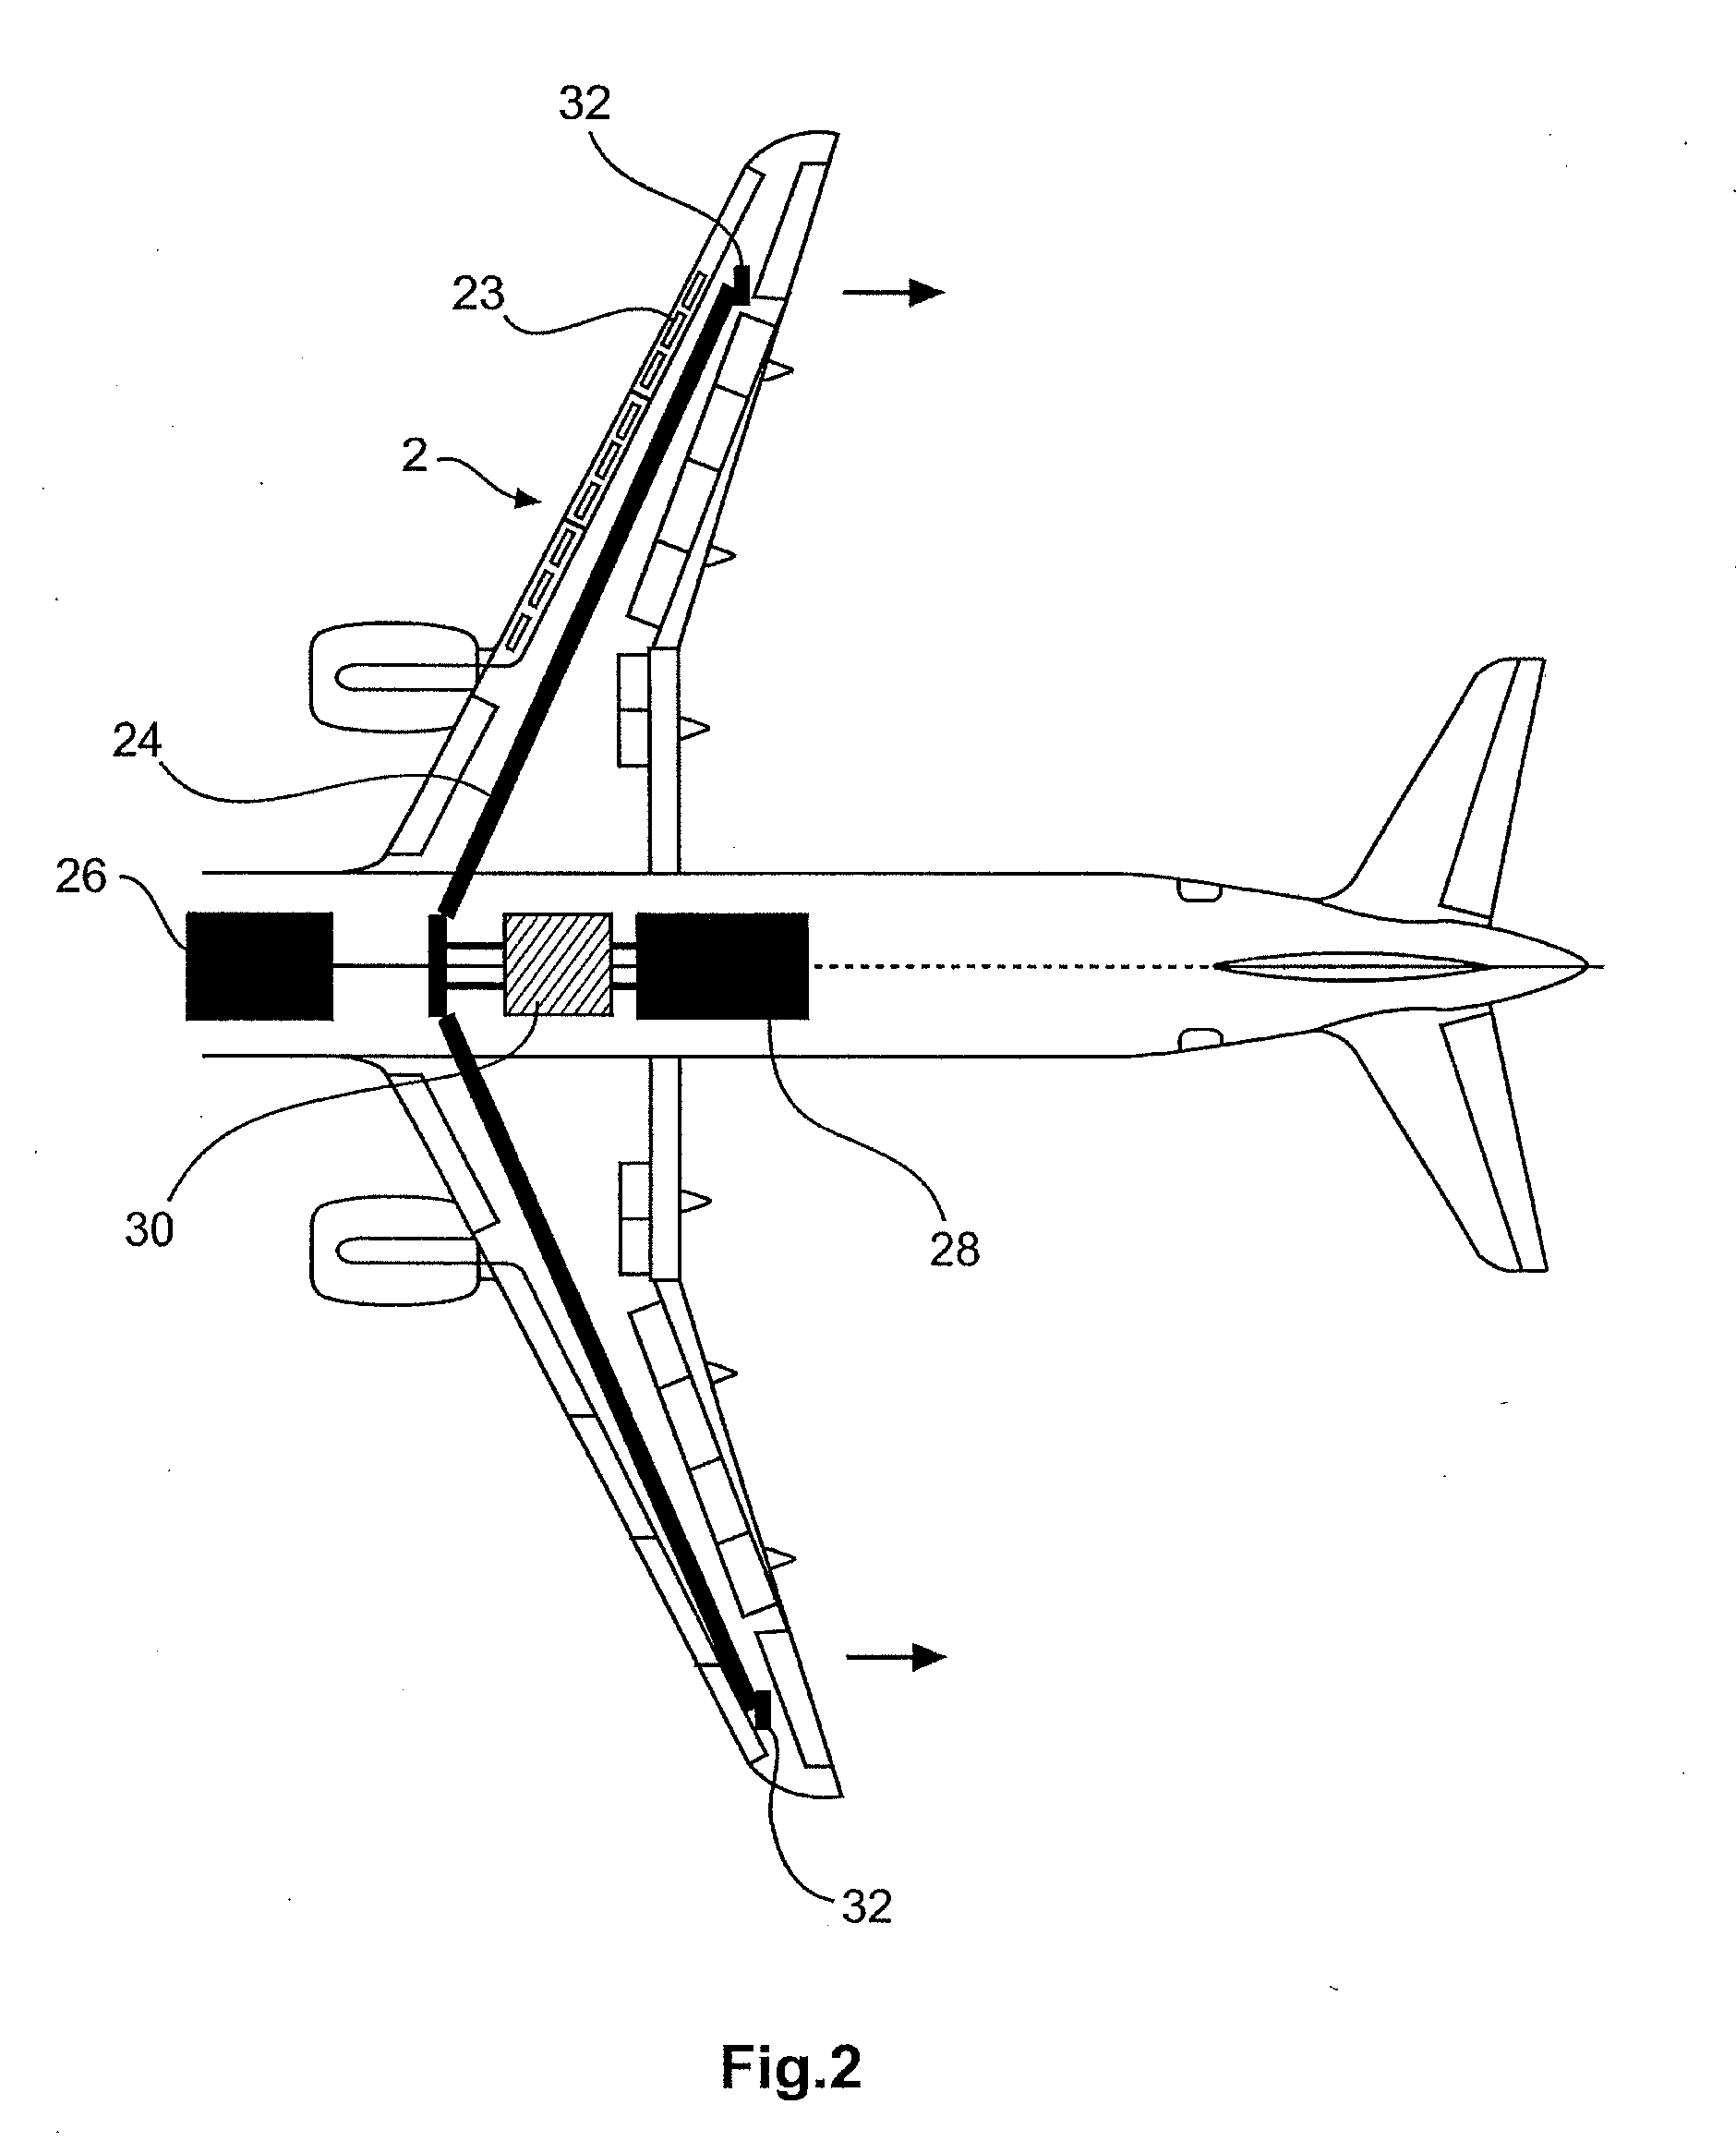 De-icing system for an aircraft